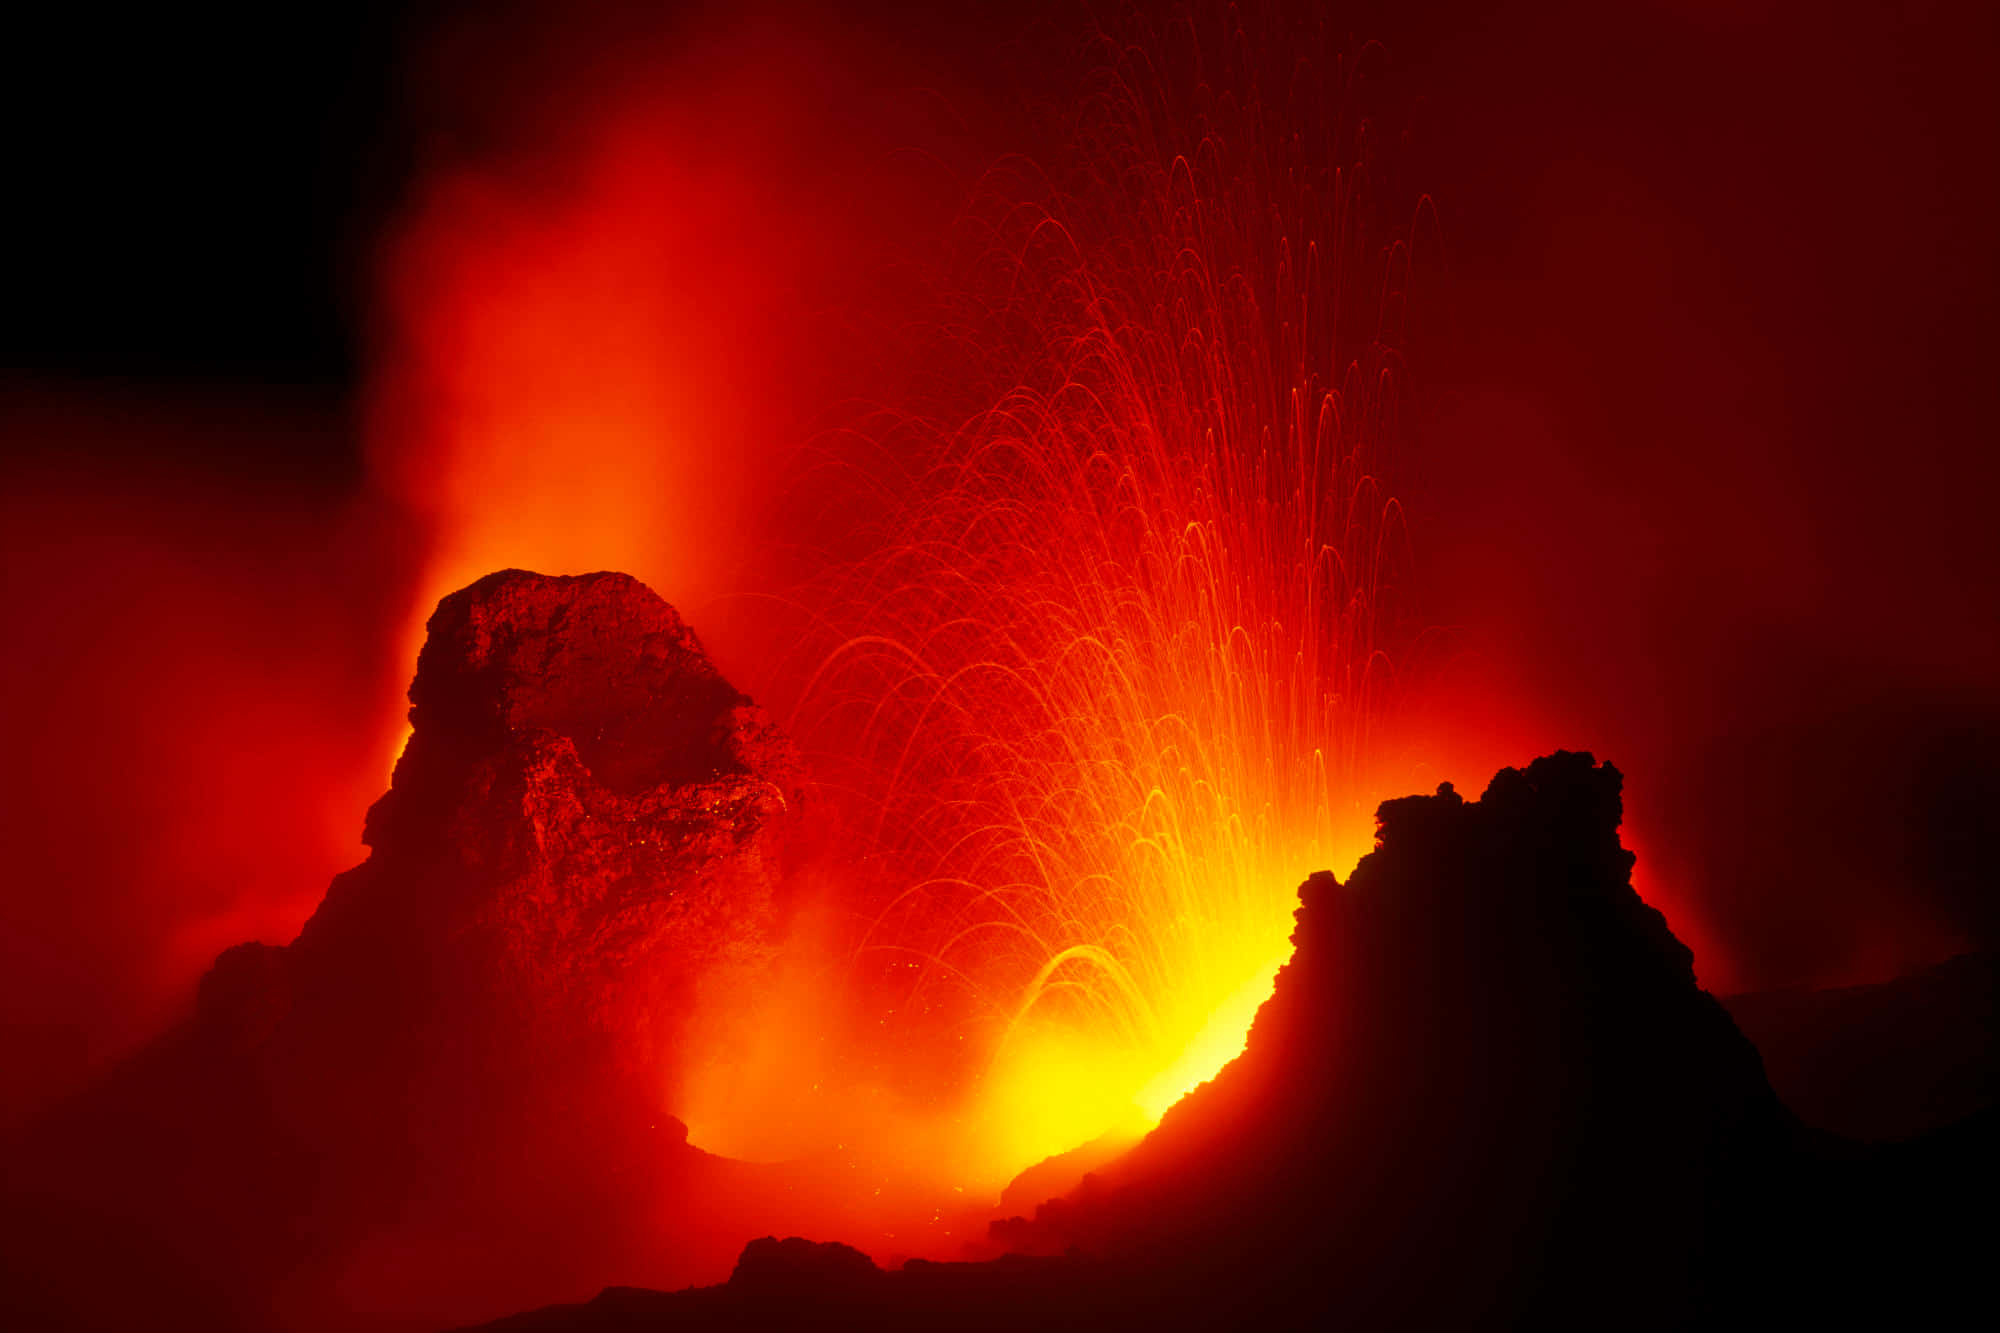 "The beauty of nature's creation - an erupting volcano"